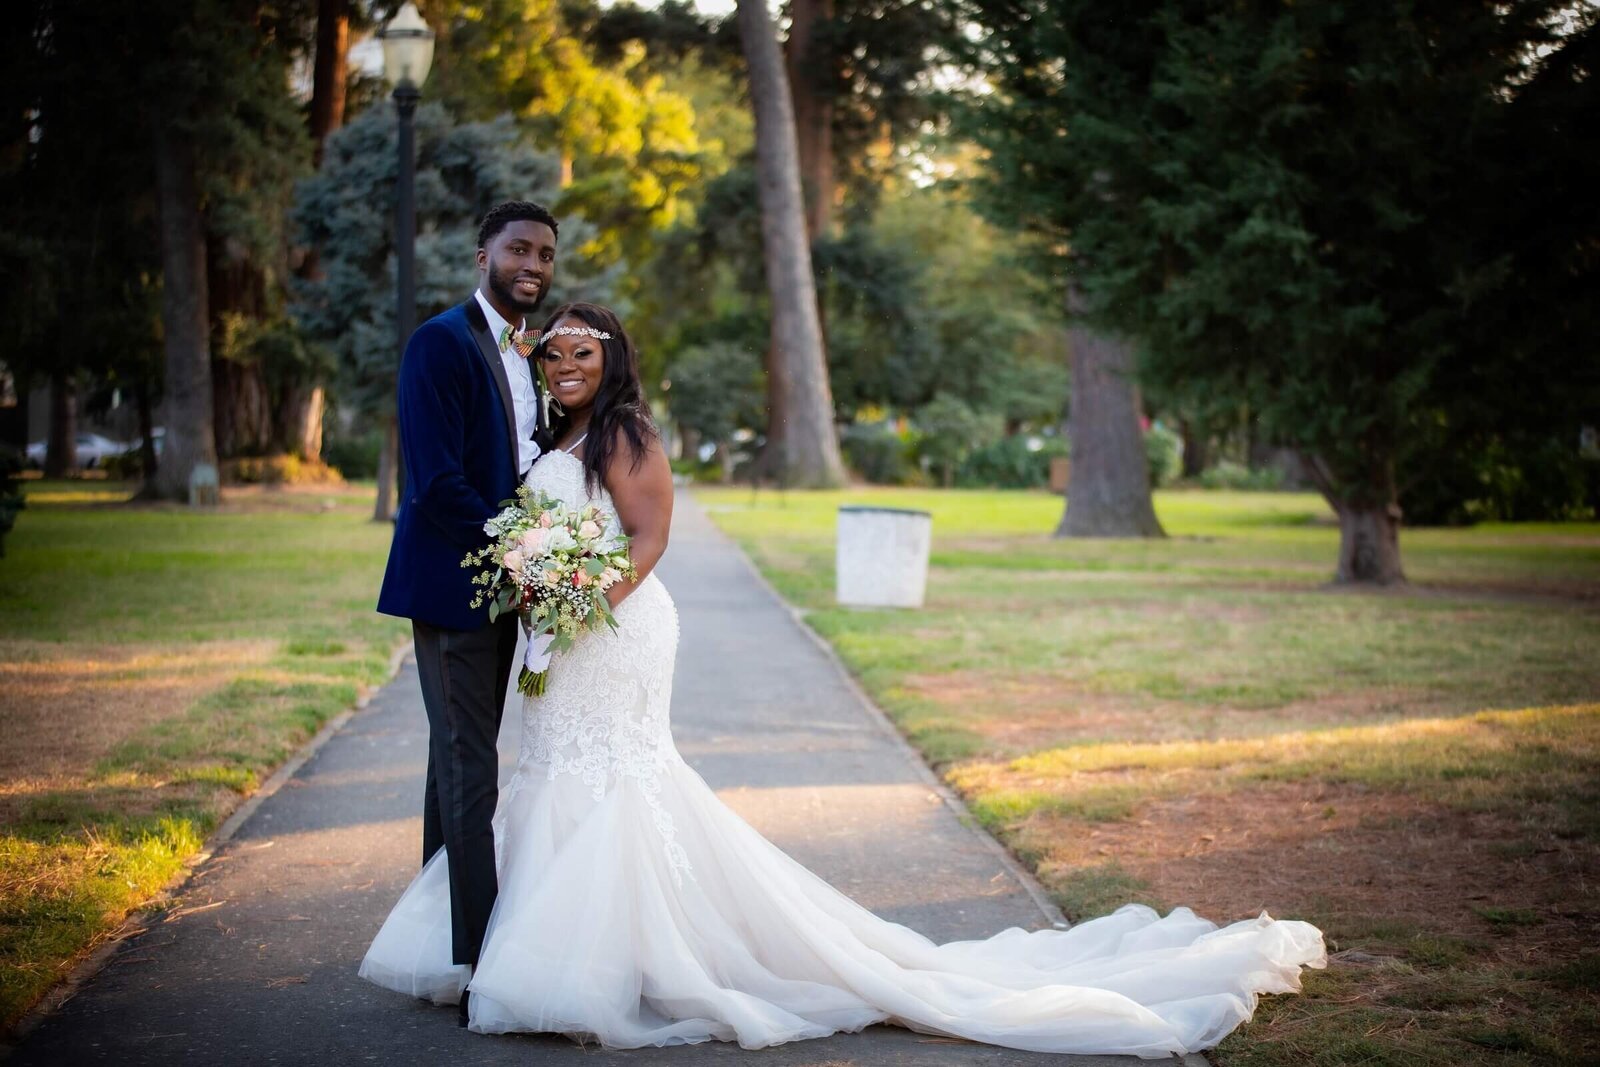 Sacramento wedding photographer, philippe studio pro captures couple in traditional wedding picture in Capitol Park.